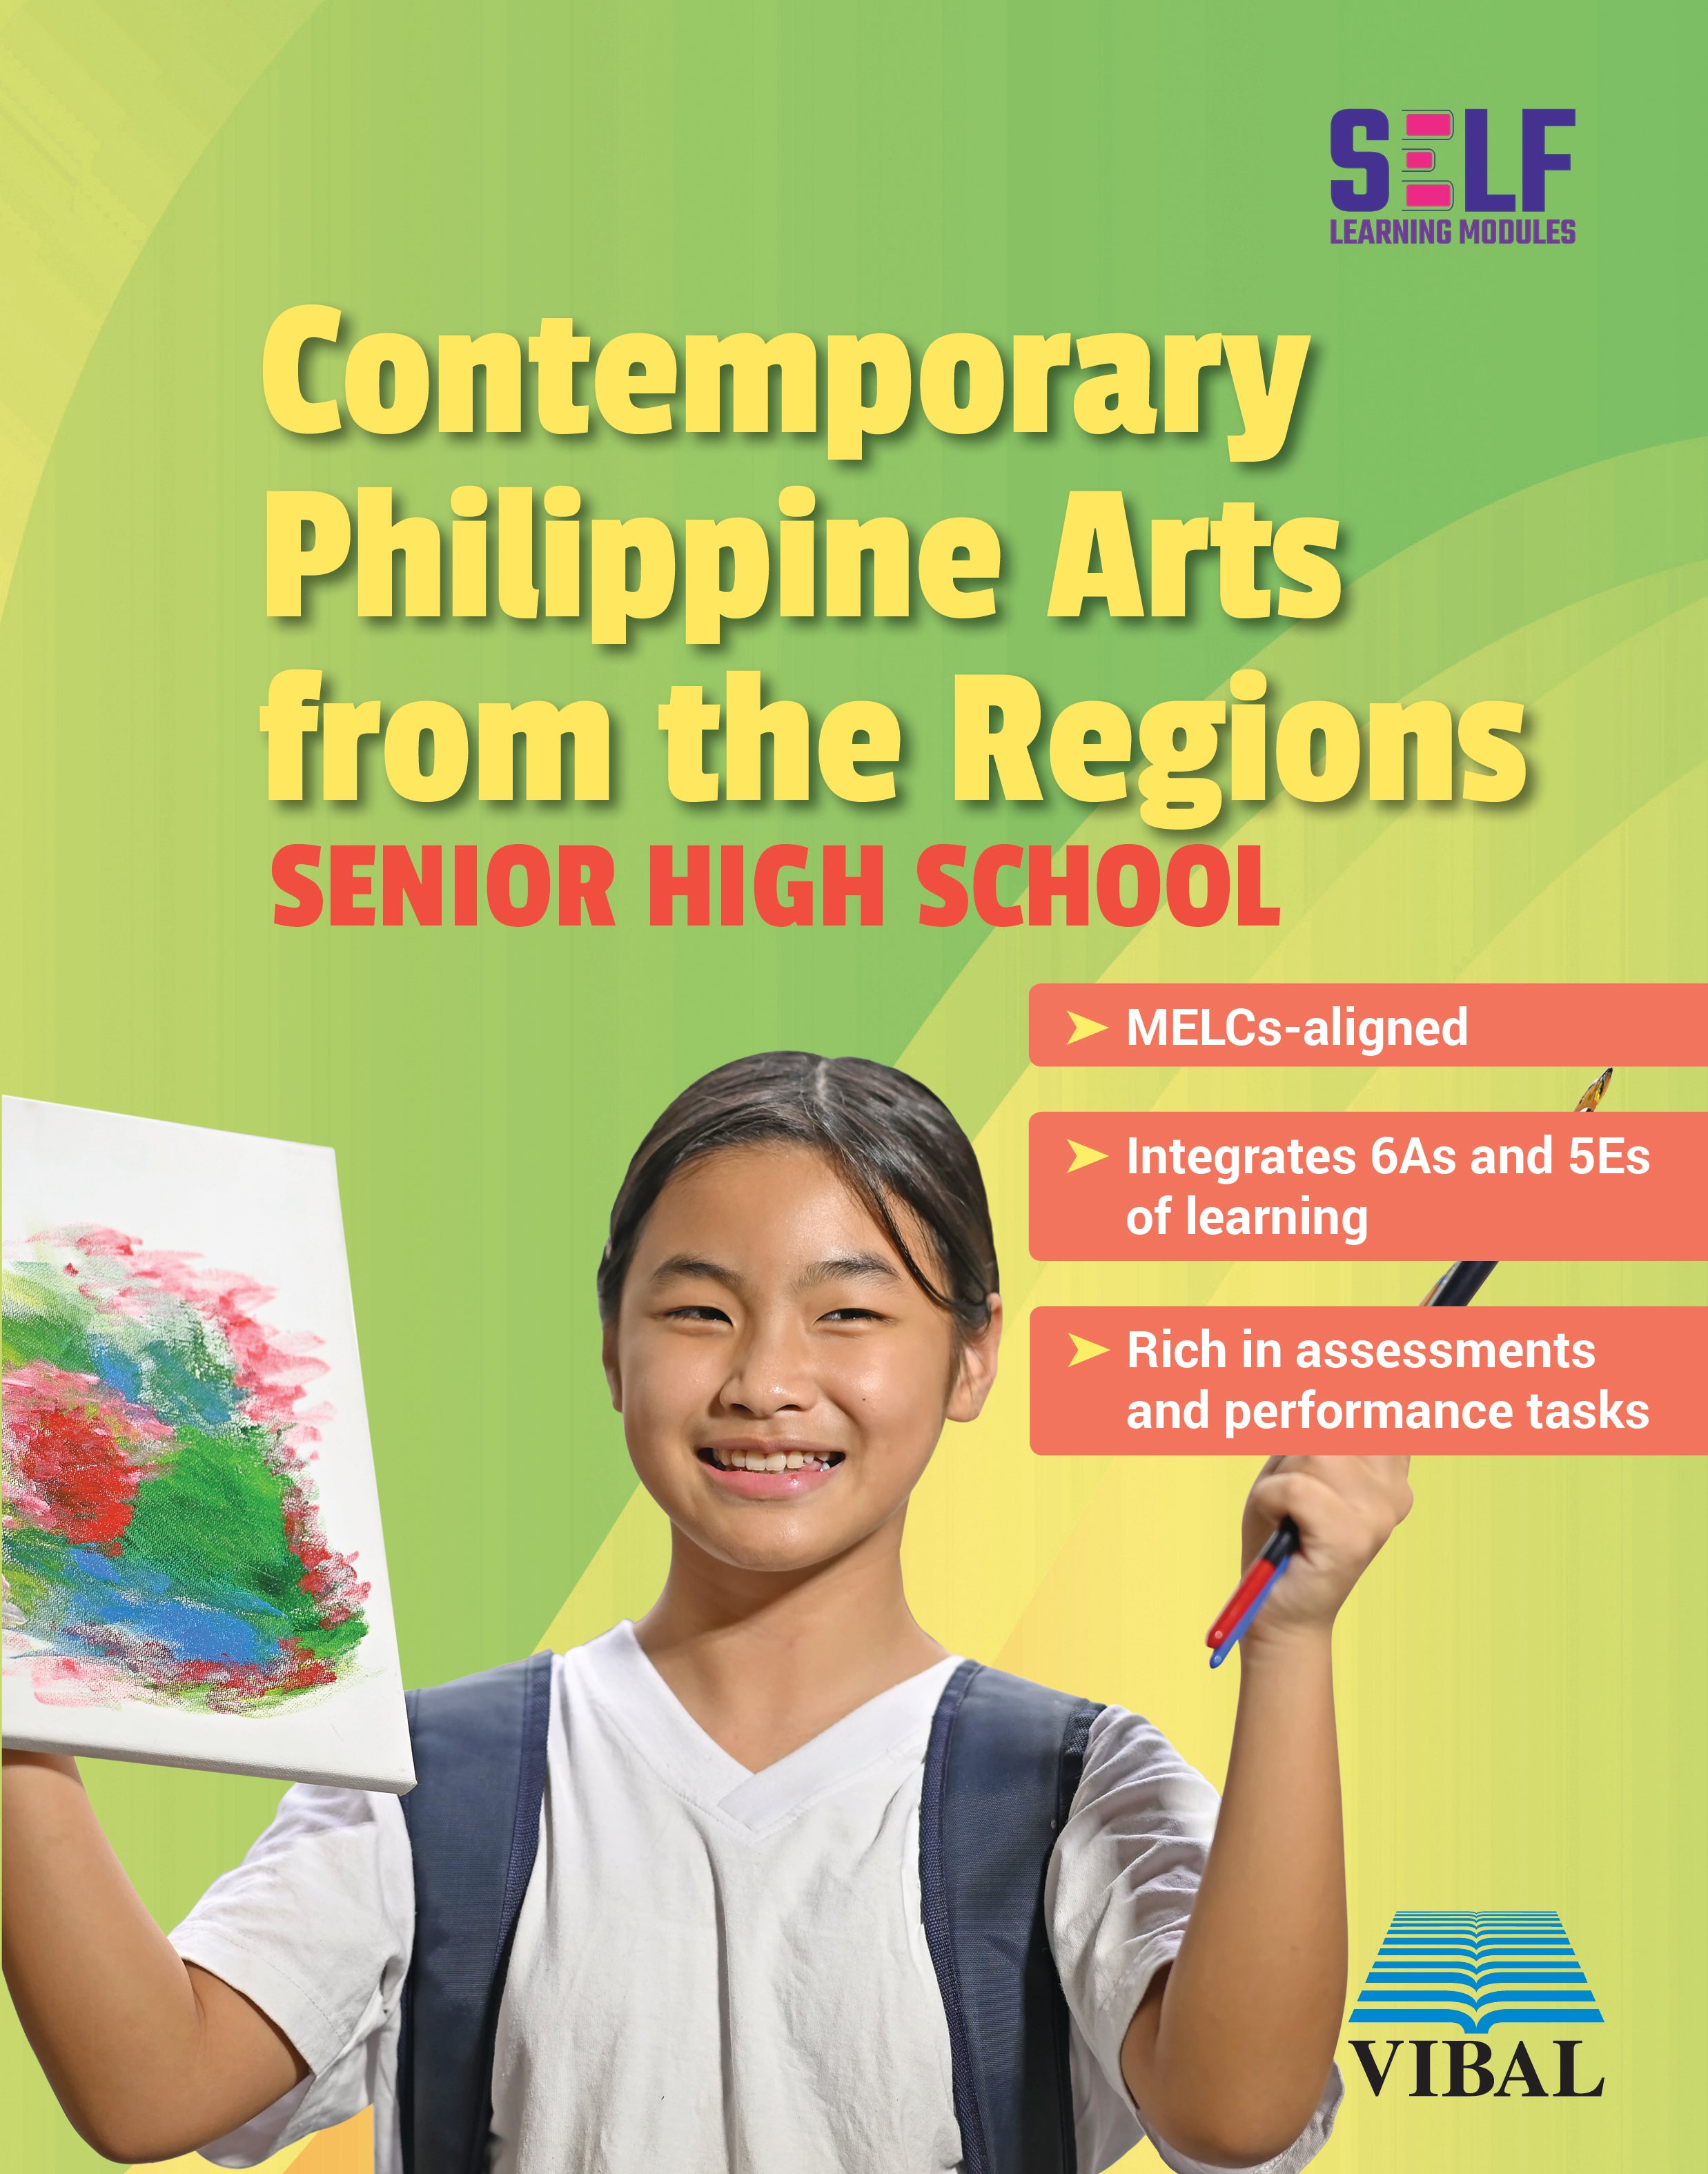 research about arts in the philippines